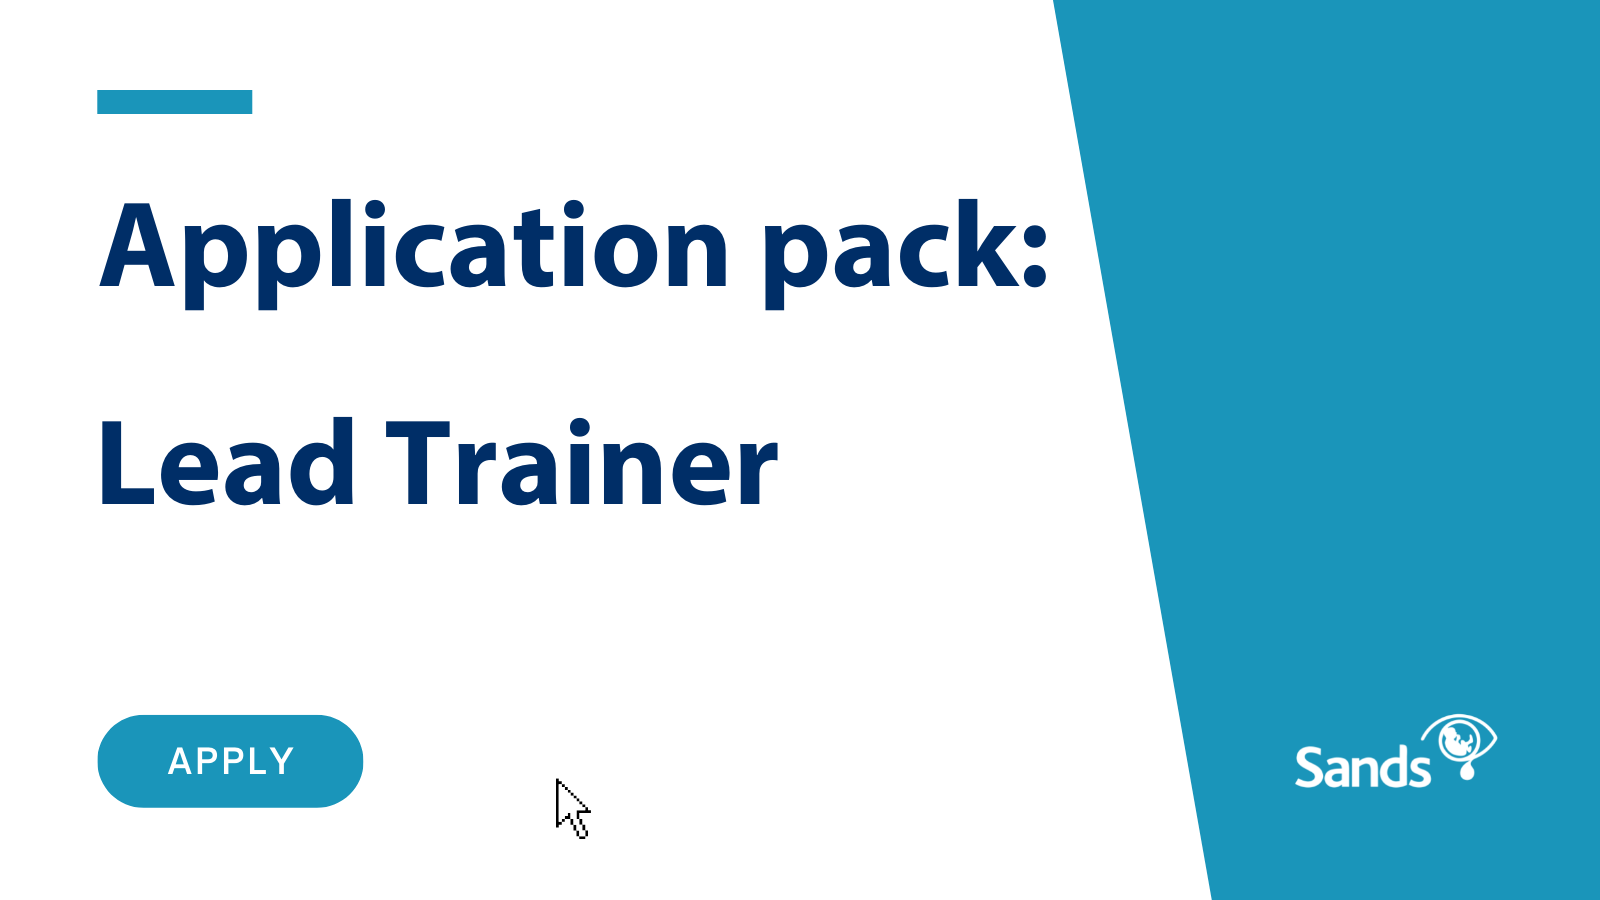 Lead Trainer Application Pack